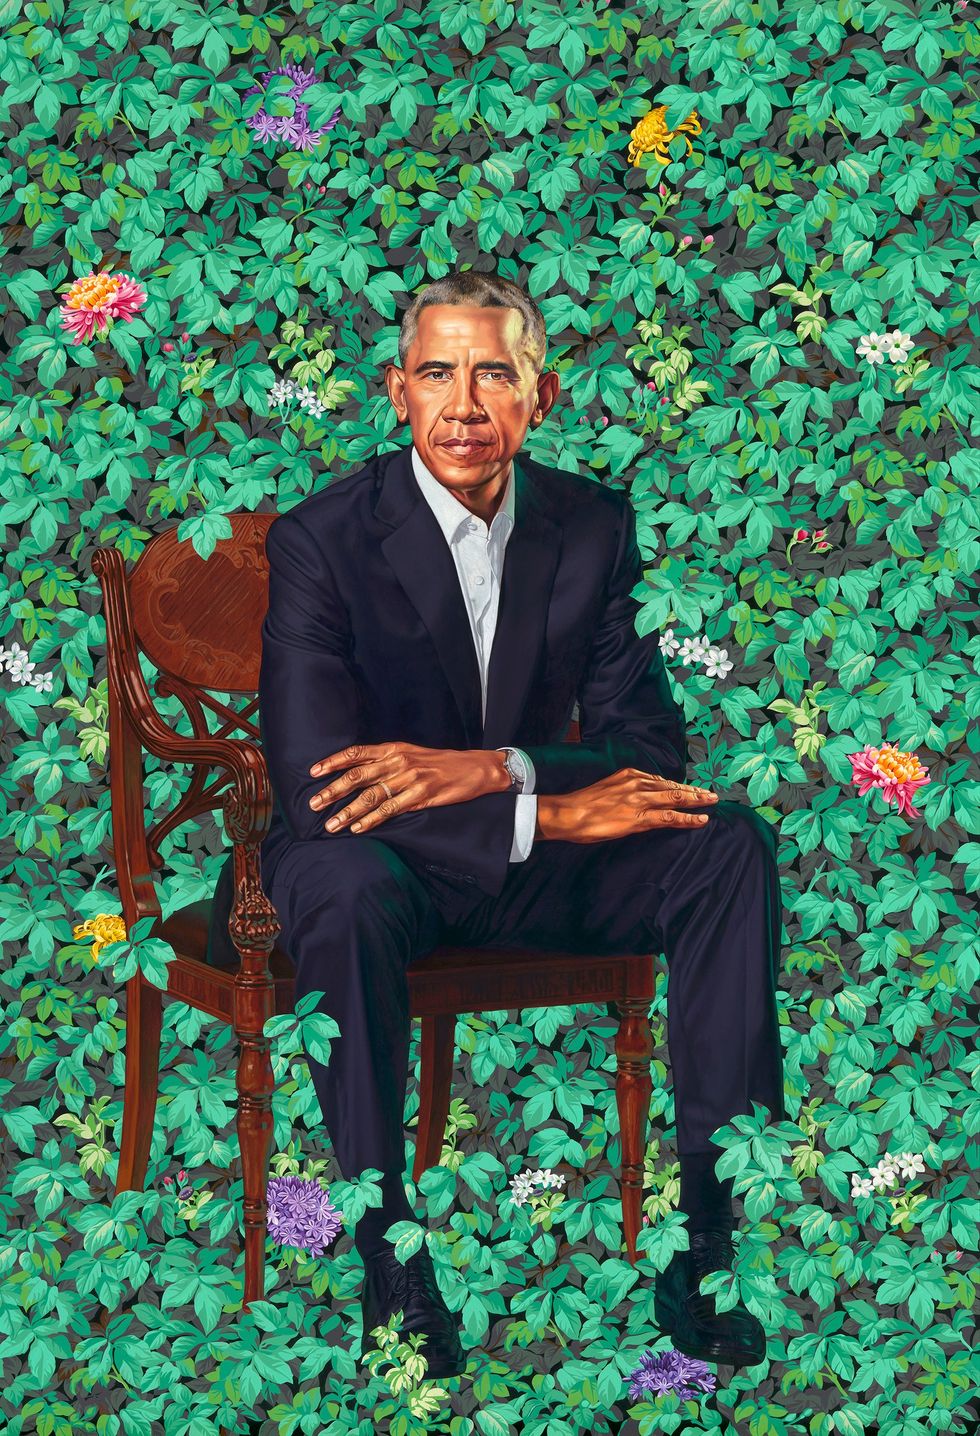 Kehinde Wiley & His Redefinition Of Contemporary Portraiture Is Not So Presidential